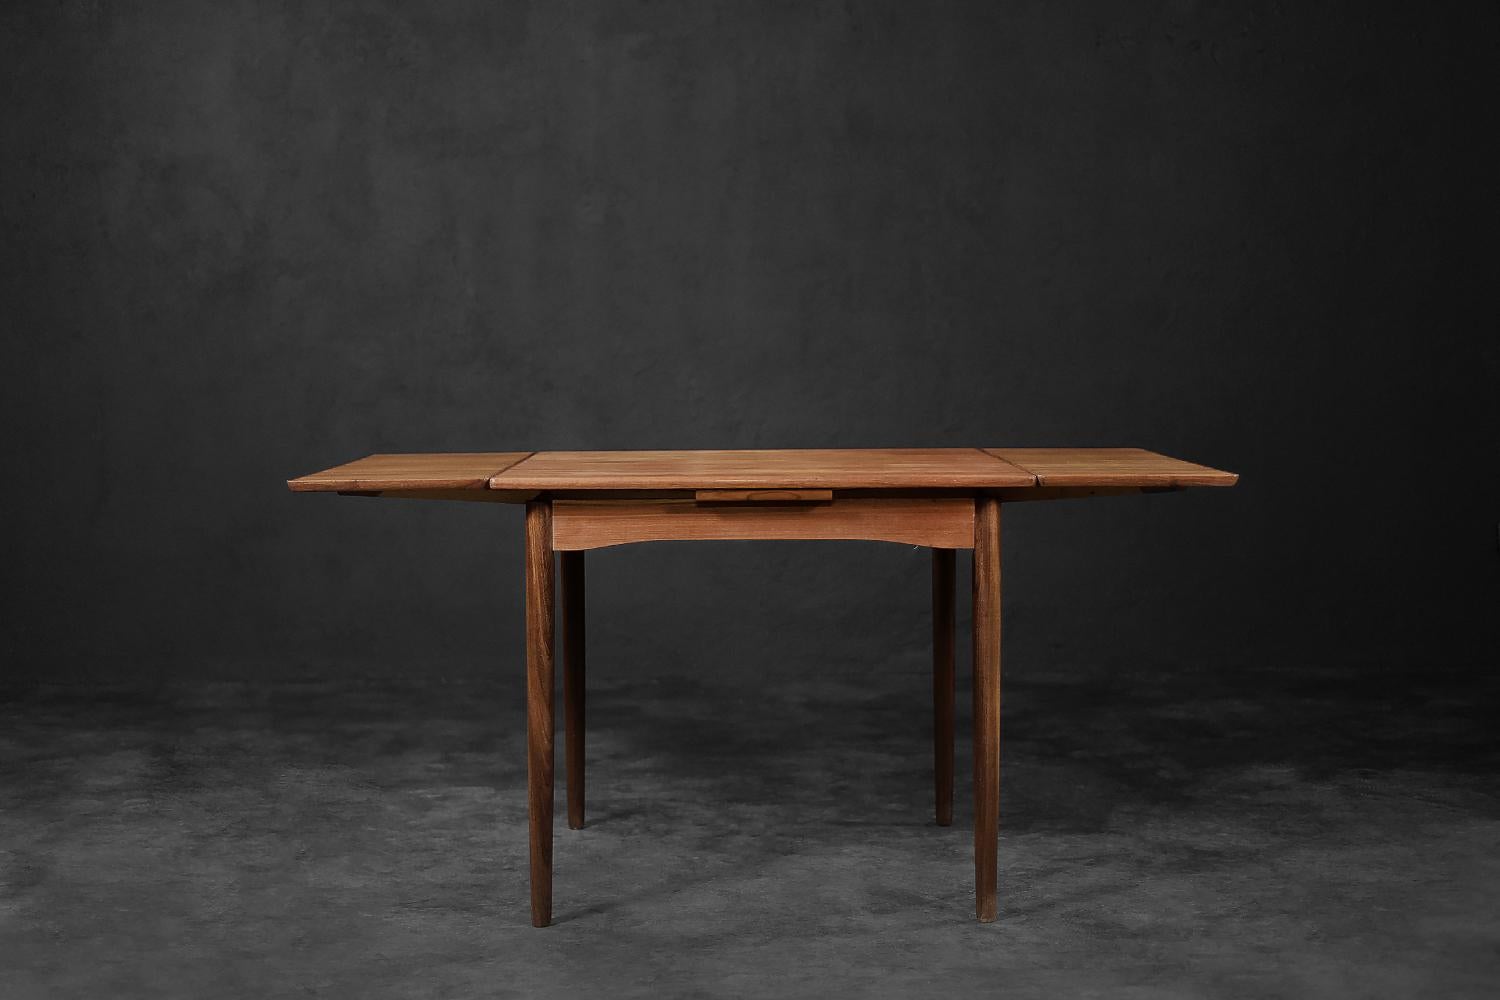 This classic dining table was made in Denmark during the 1960s. The table is an example of Danish minimalism from the Mid-century Modern era. It is made of teak wood in a natural shade of brown. It has turned legs made of solid wood. Due to the